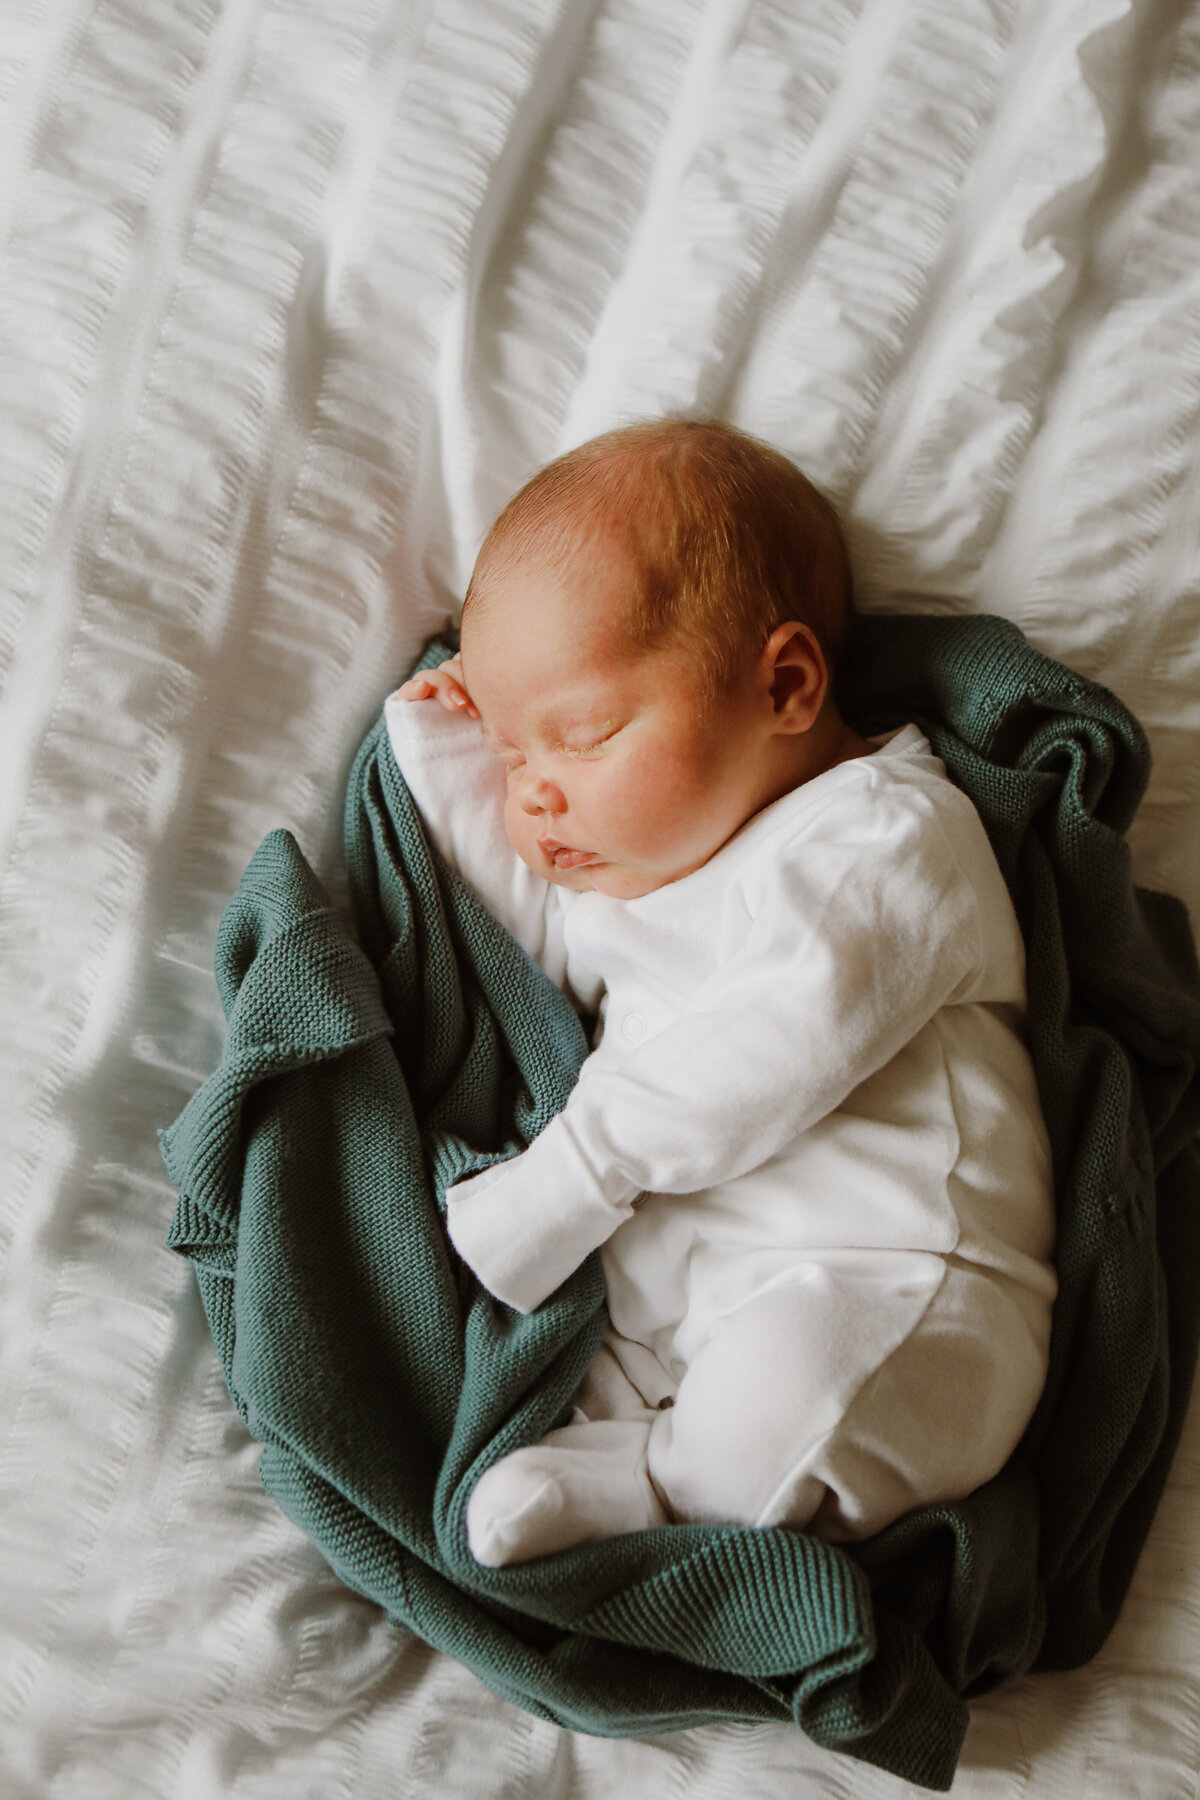 At home newborn shoots, in the calm environment of your own home